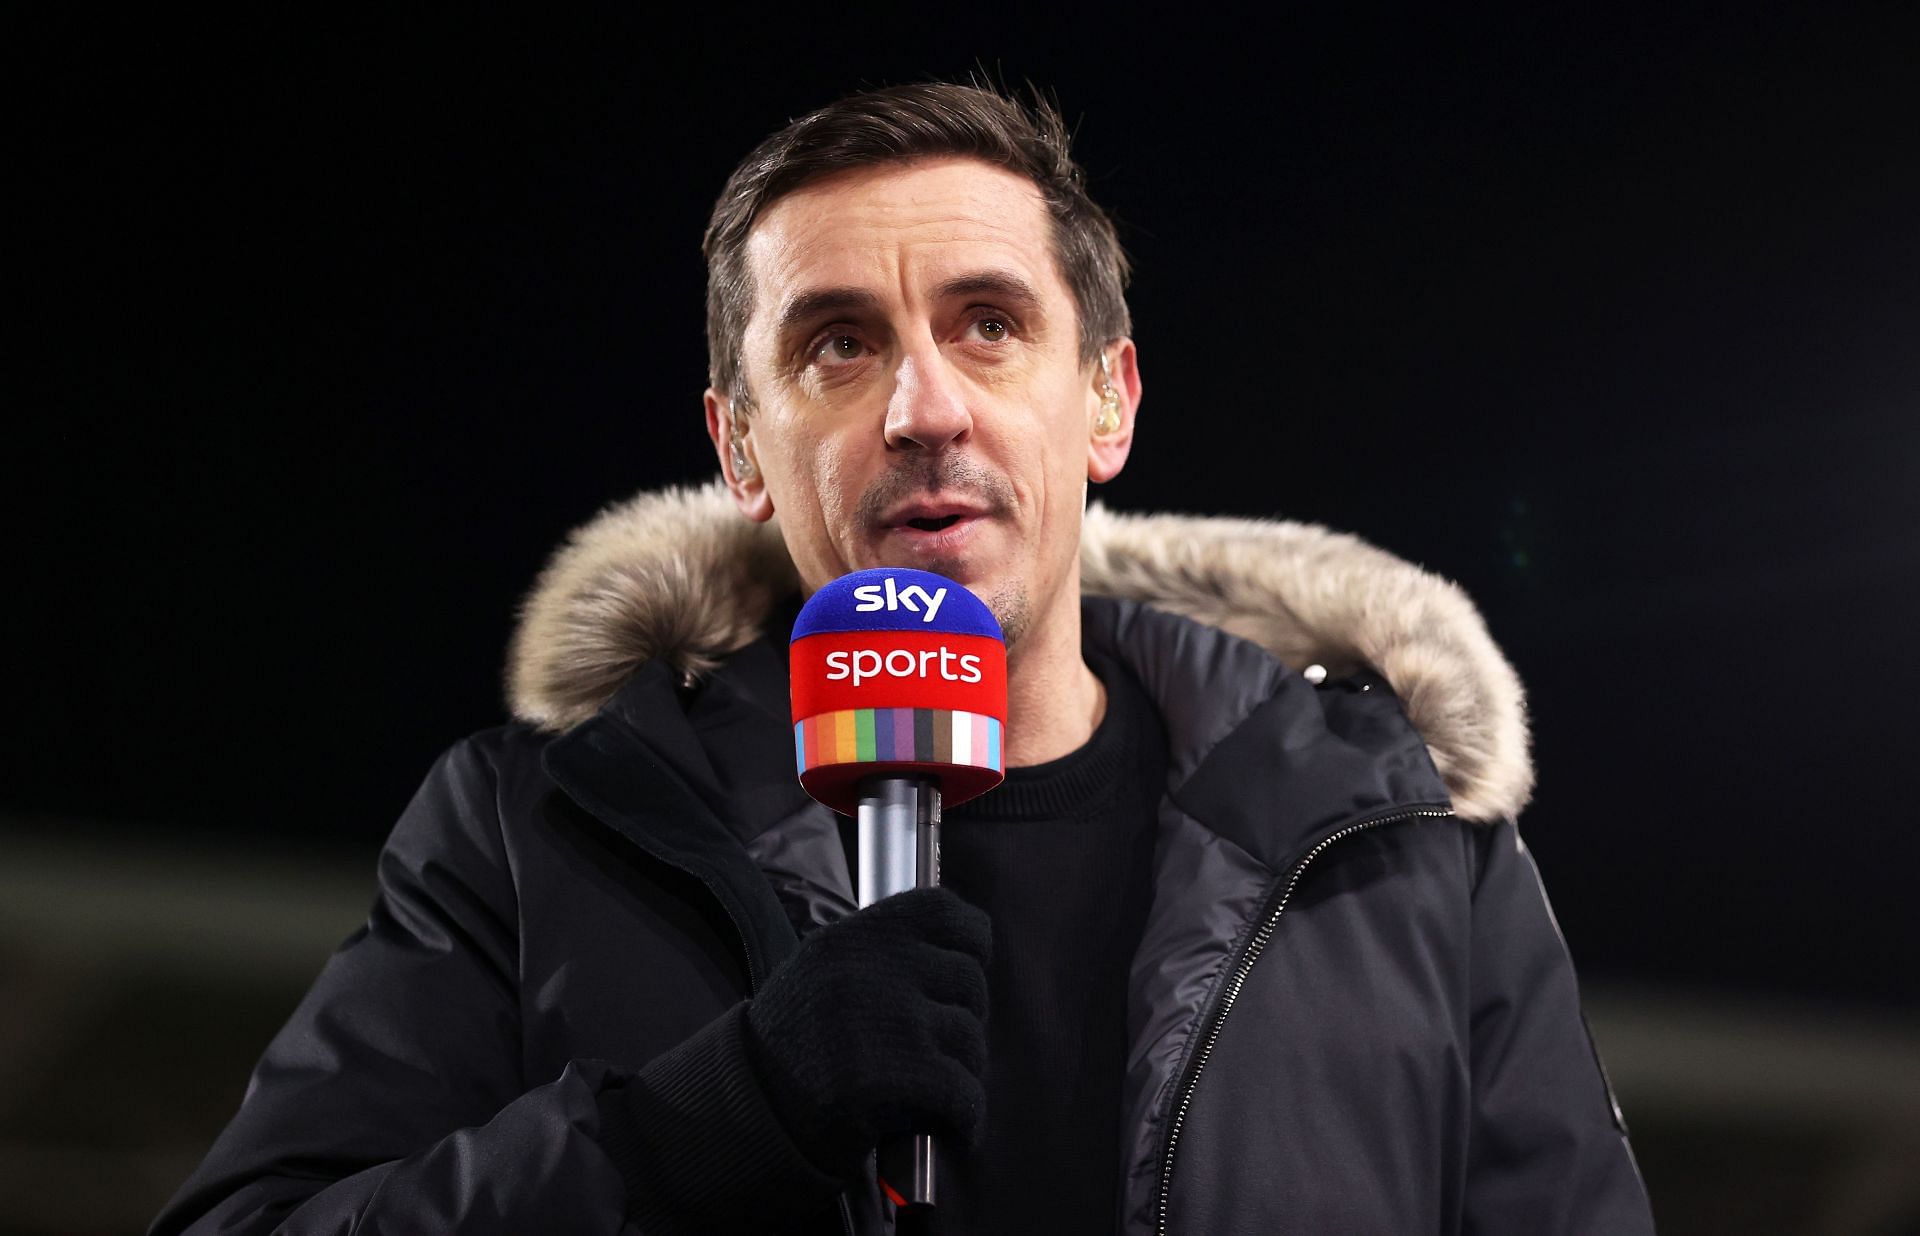 Neville explained why he expected more from Forlan and Veron